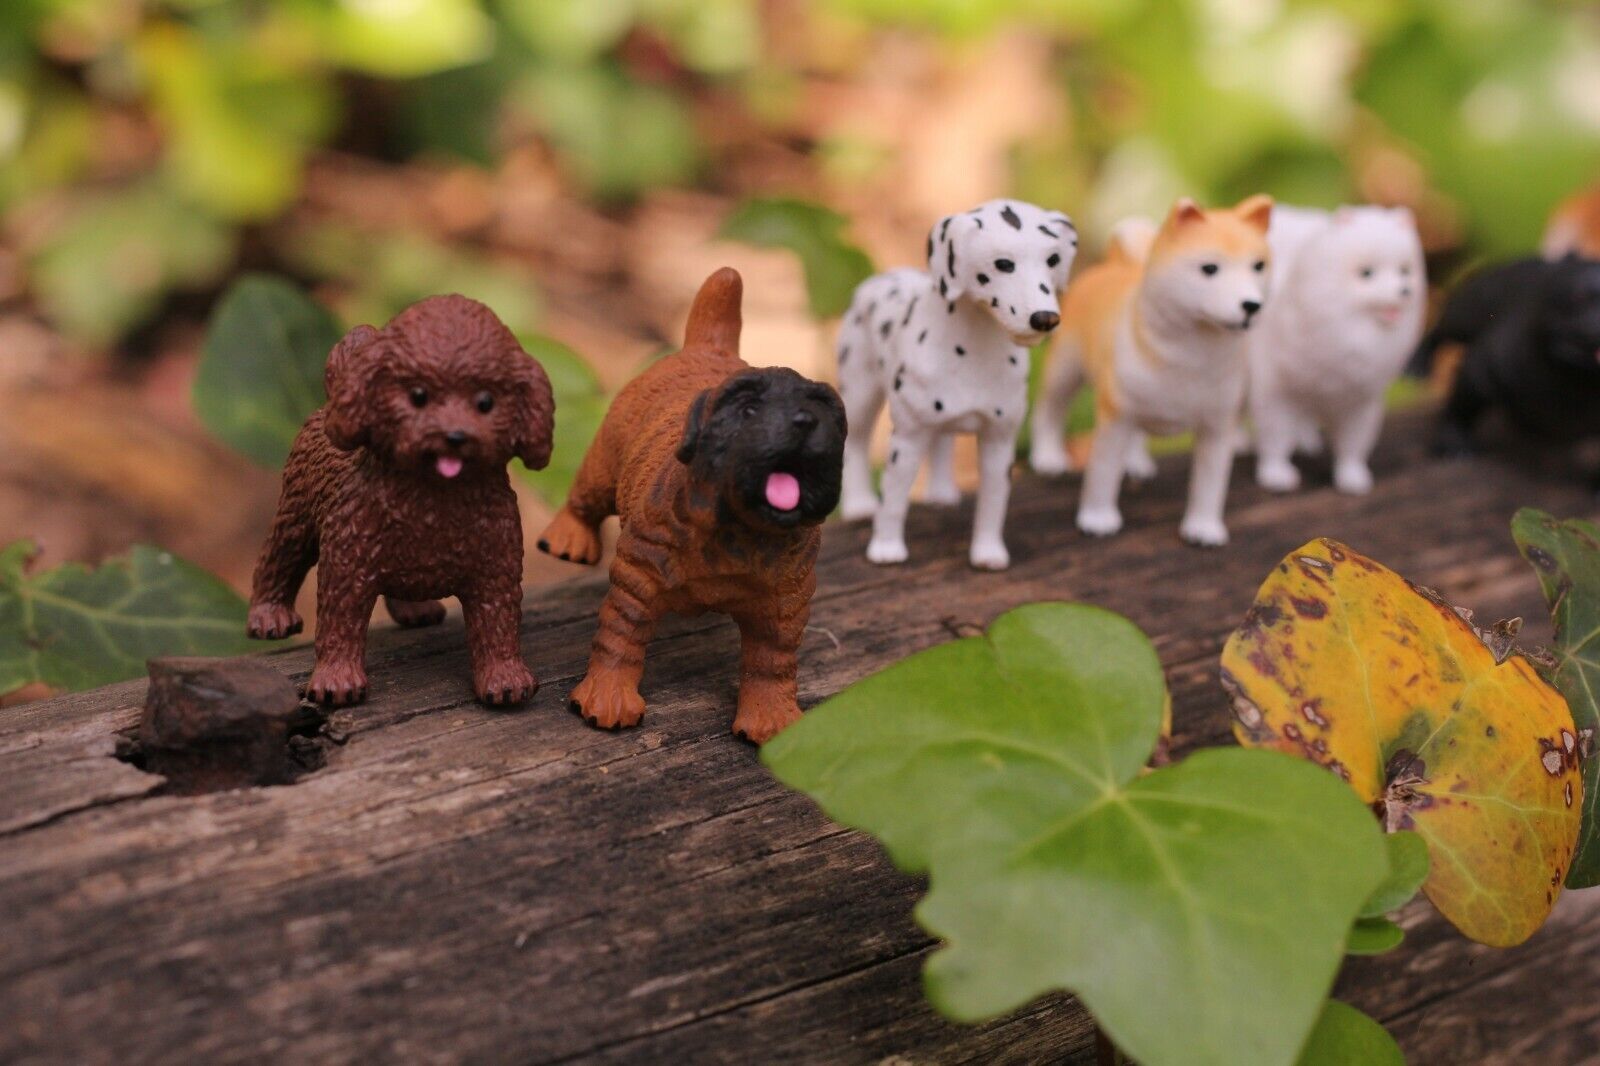 Dog Figurines 8 piece Toy Set Realistic Hand Painted Puppy Miniature Figures